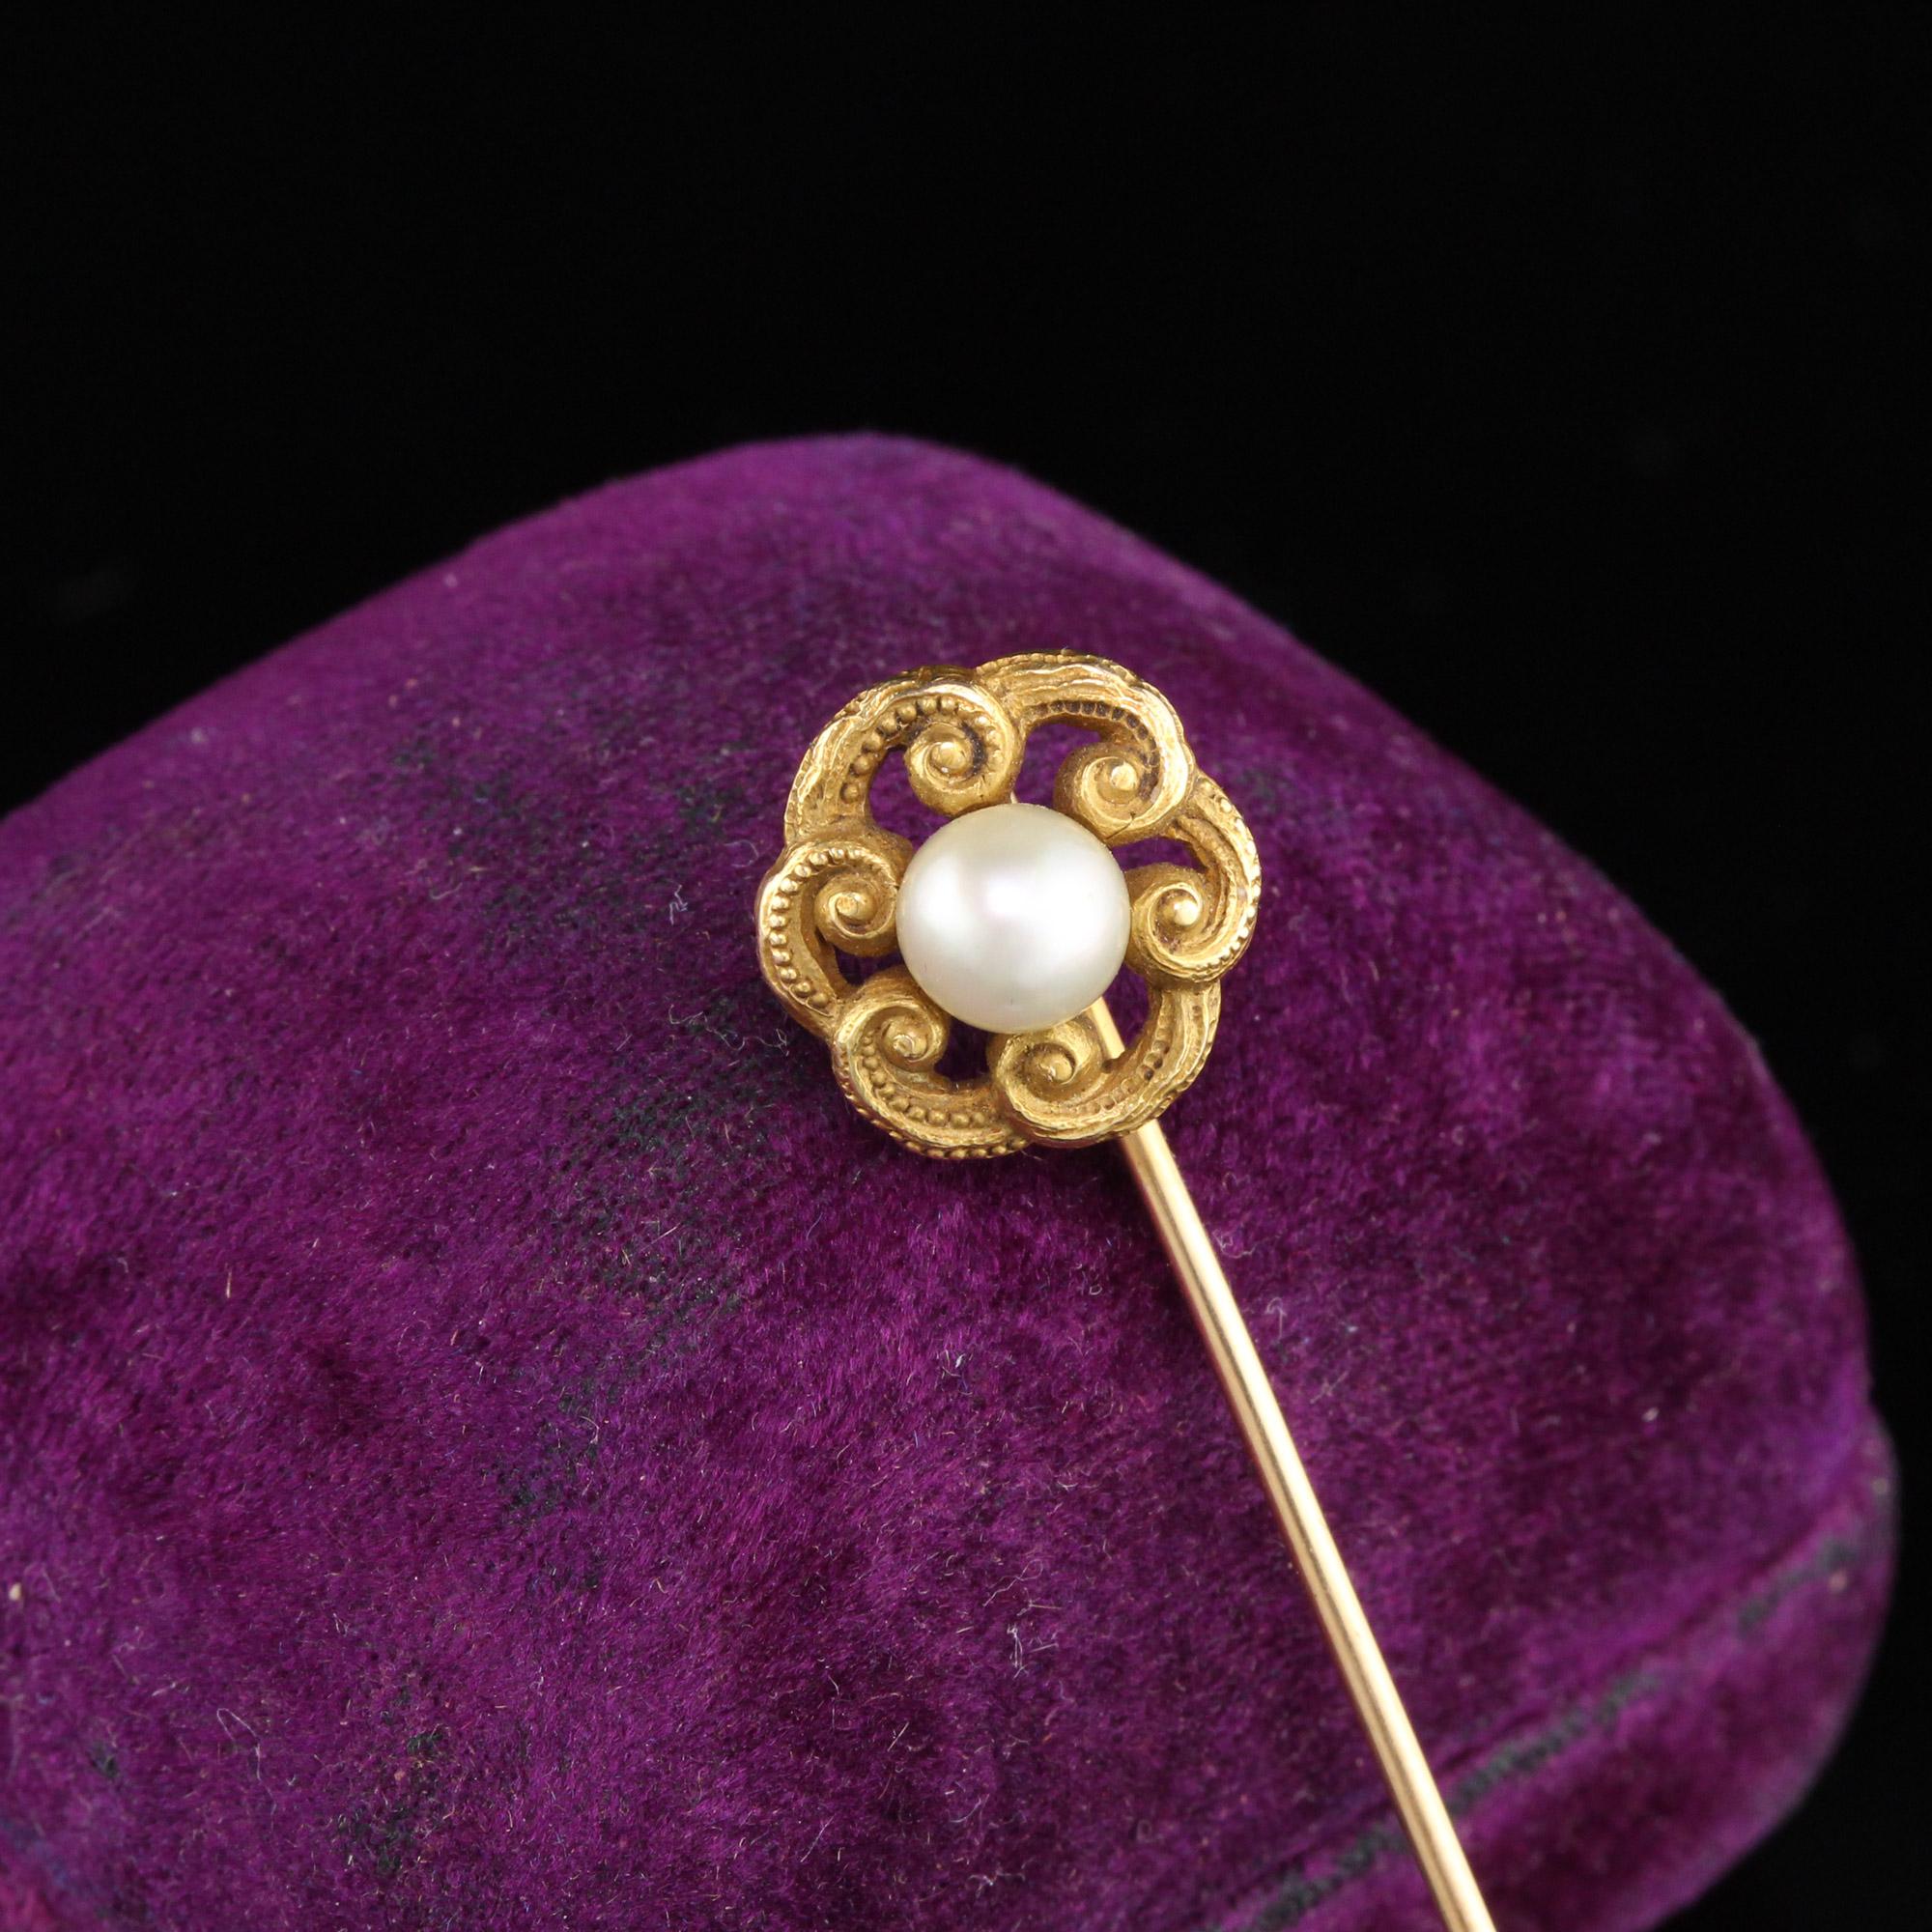 Beautiful Art Nouveau stick pin with a floral motif and a pearl center.

Metal: 14K Yellow Gold 

Weight: 2.8 Grams

Measurements: Head measures 12.88 x 12.64 mm